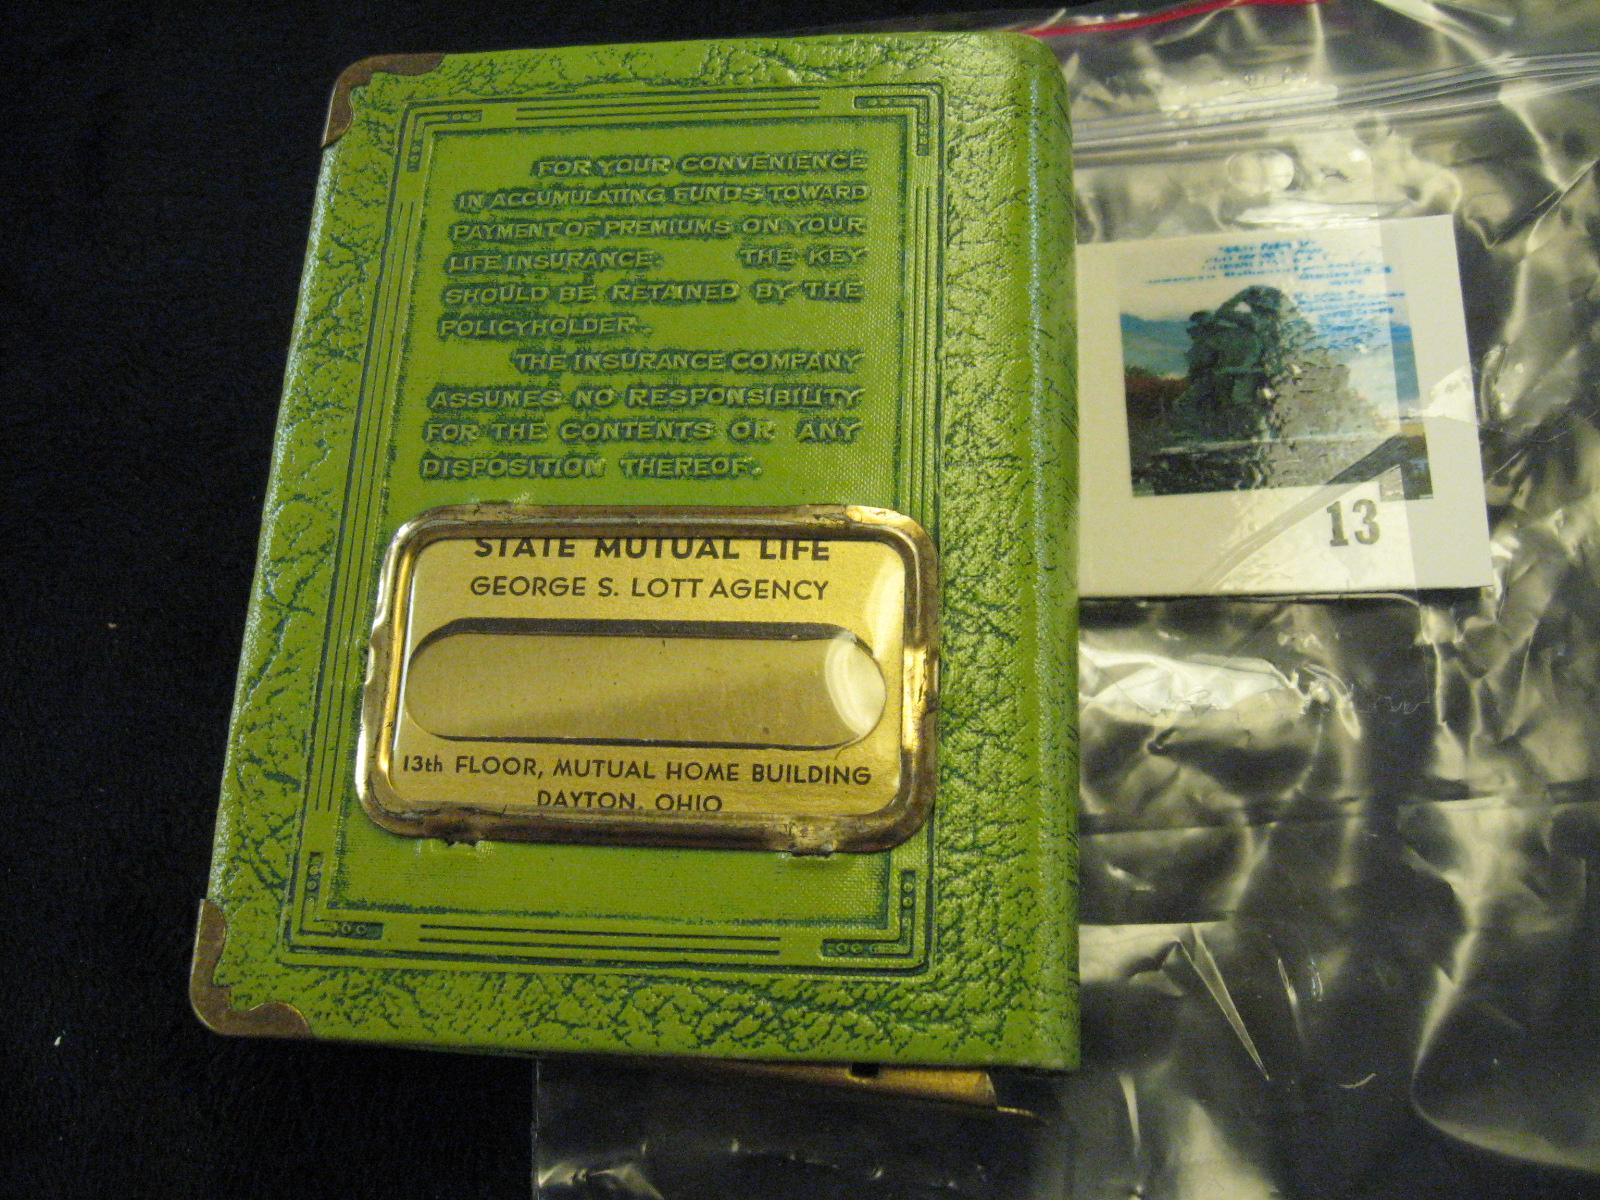 "Time Flies" leather bound book style coin safe with key, advertising premium from State Mutual Life